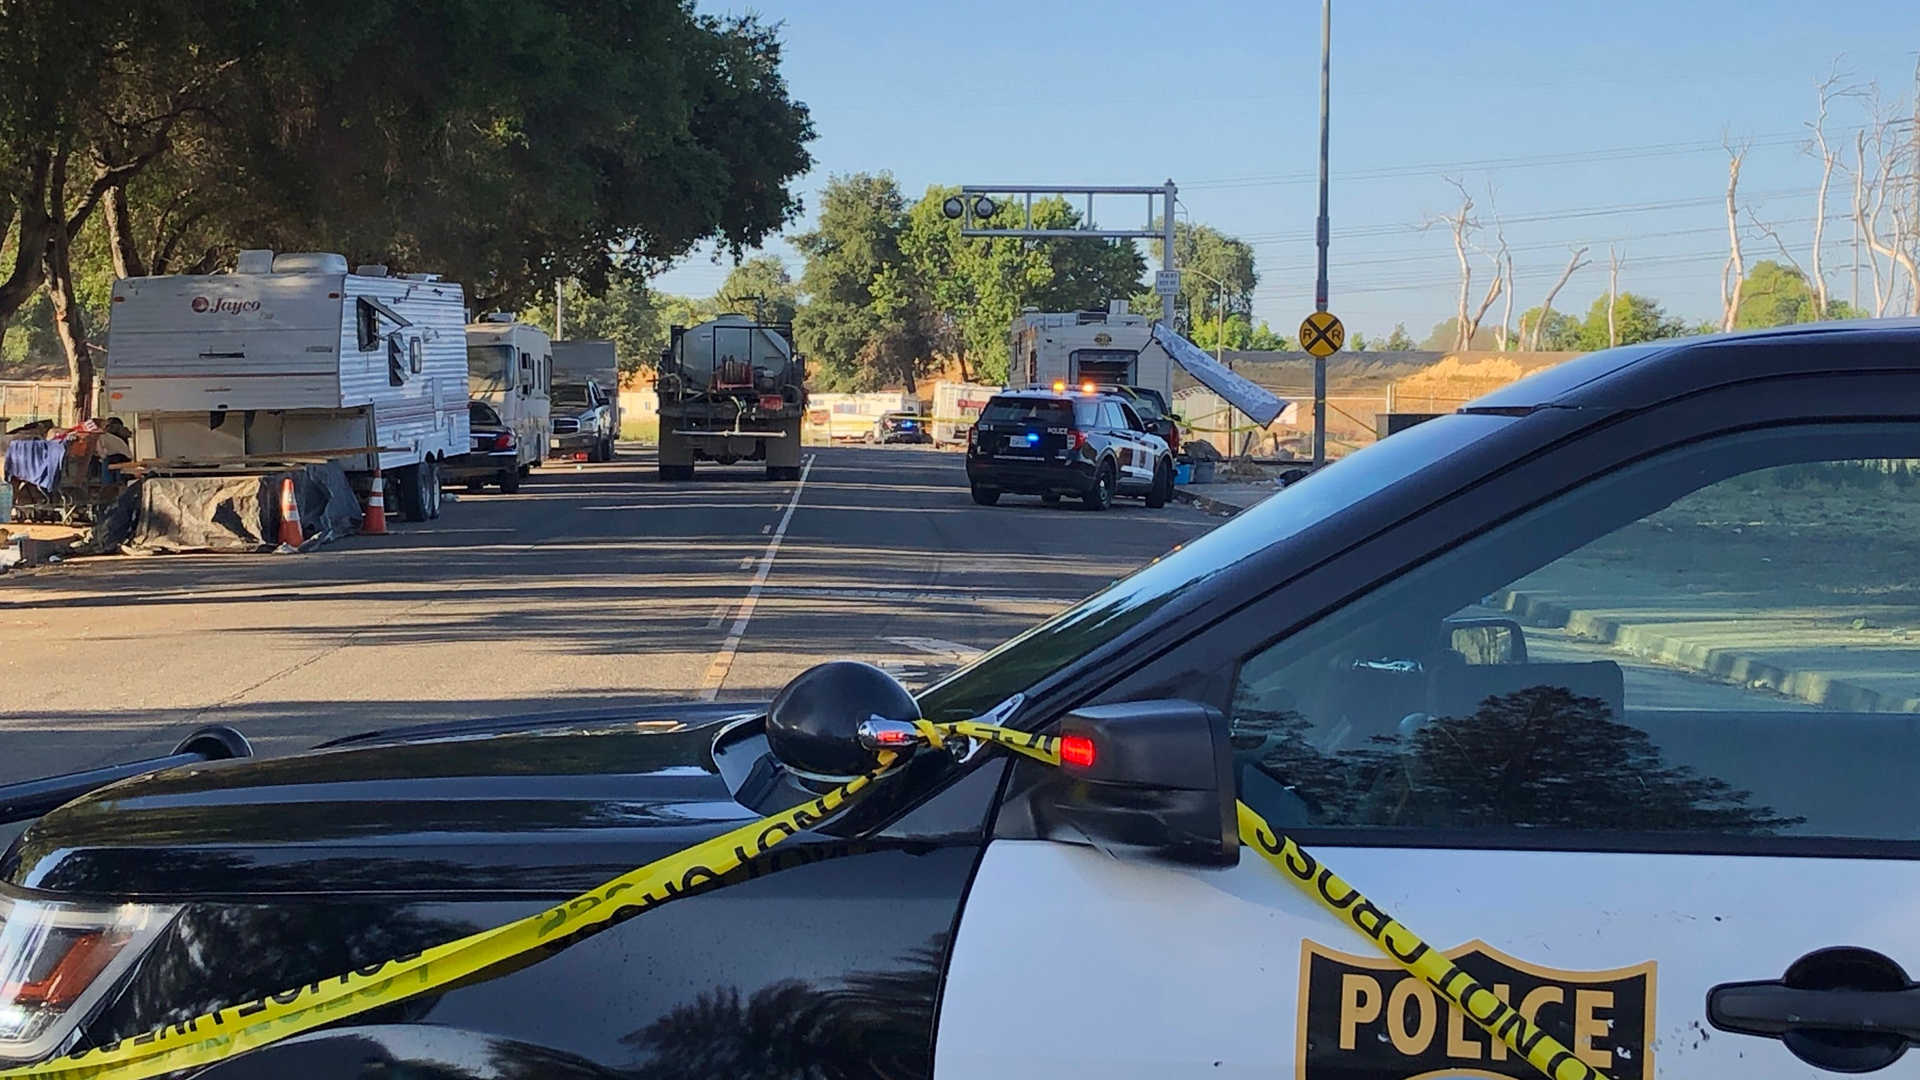 Officers were called to the area of Commerce Circle and Lathrop Way and upon arrival, officers found a man with serious injuries. That man eventually died.